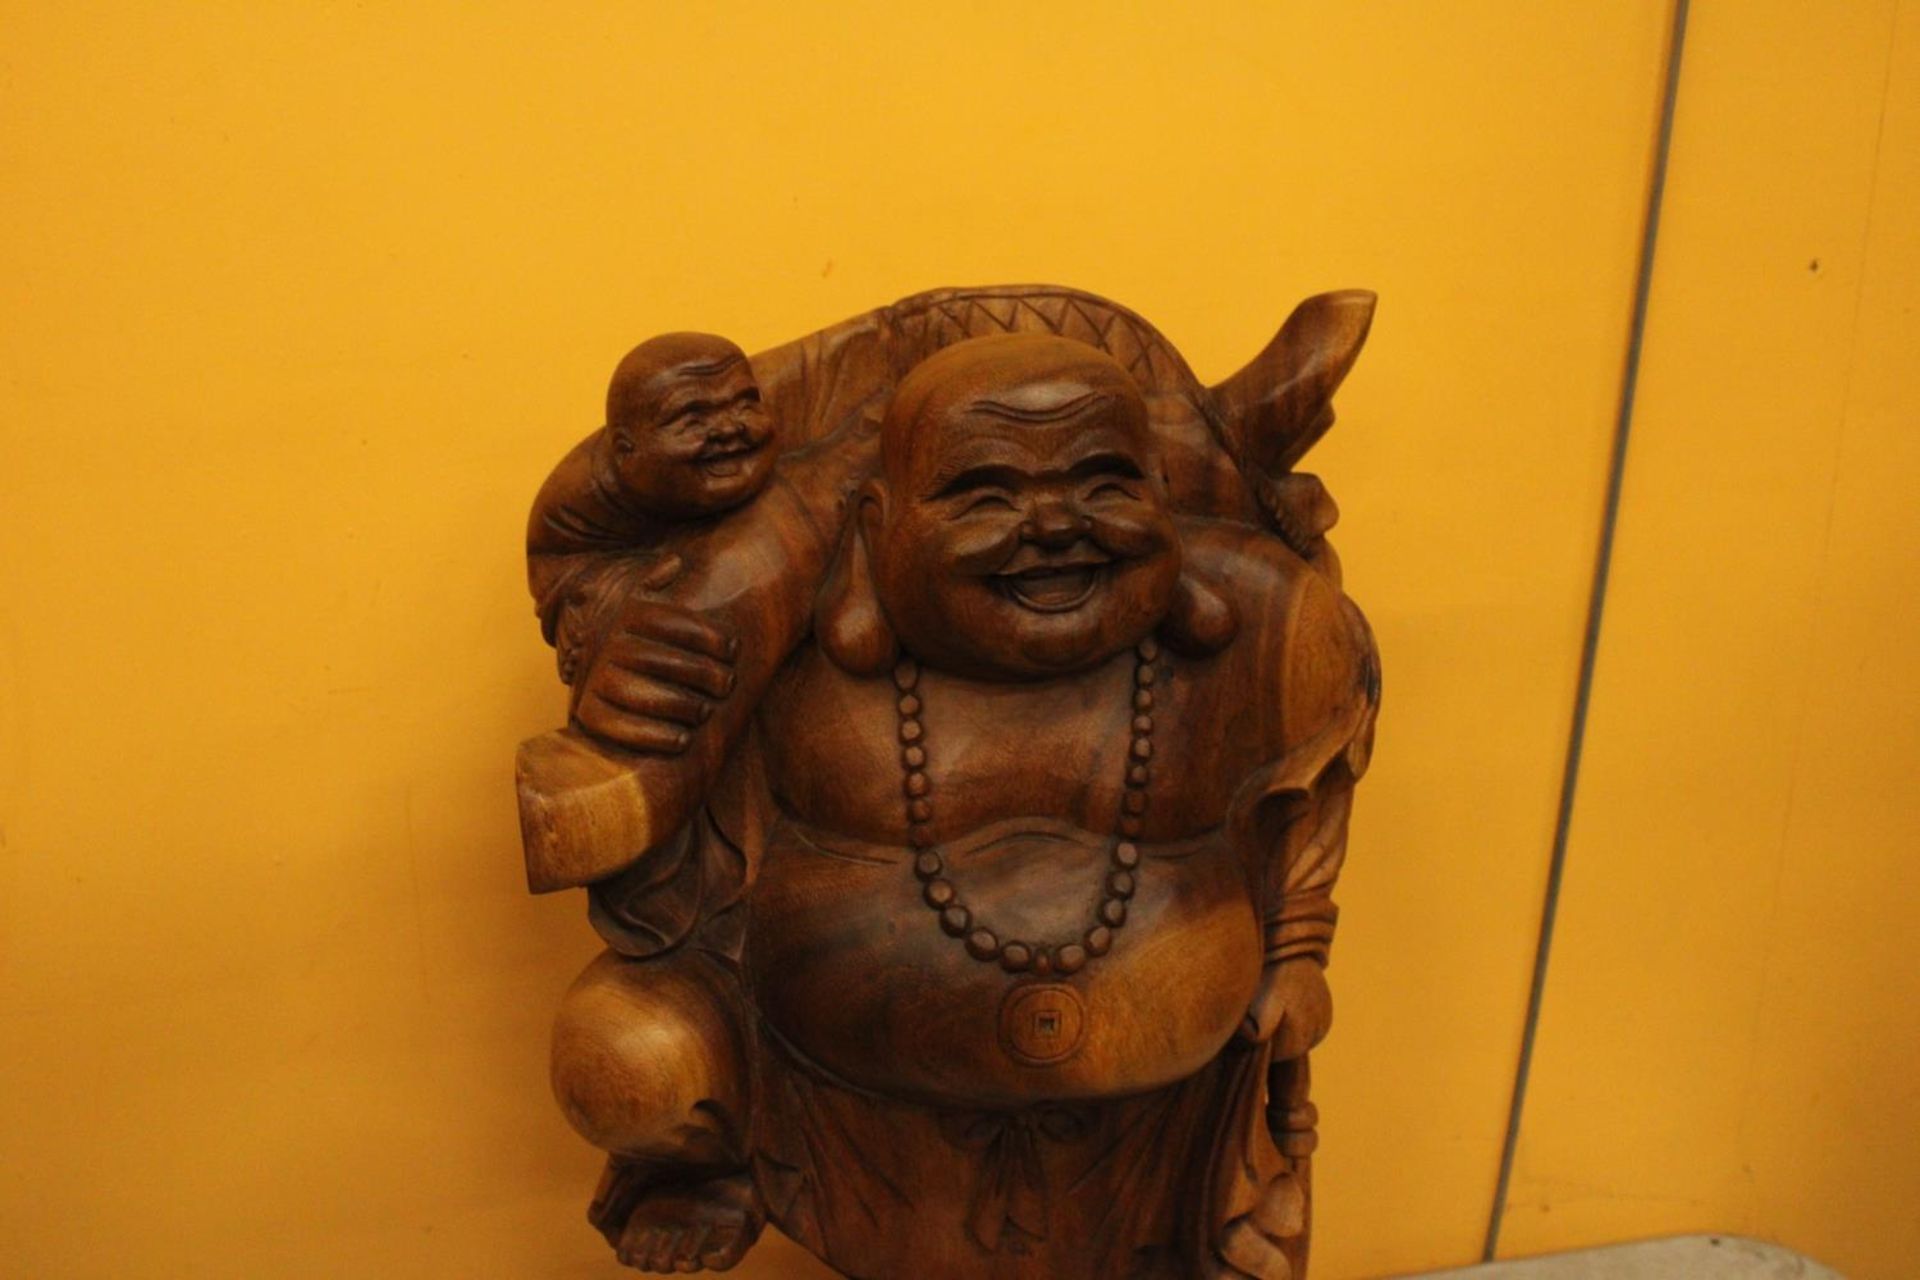 A CARVED WOODEN LAUGHING BUDDAH FIGURE 20" TALL - Image 2 of 6